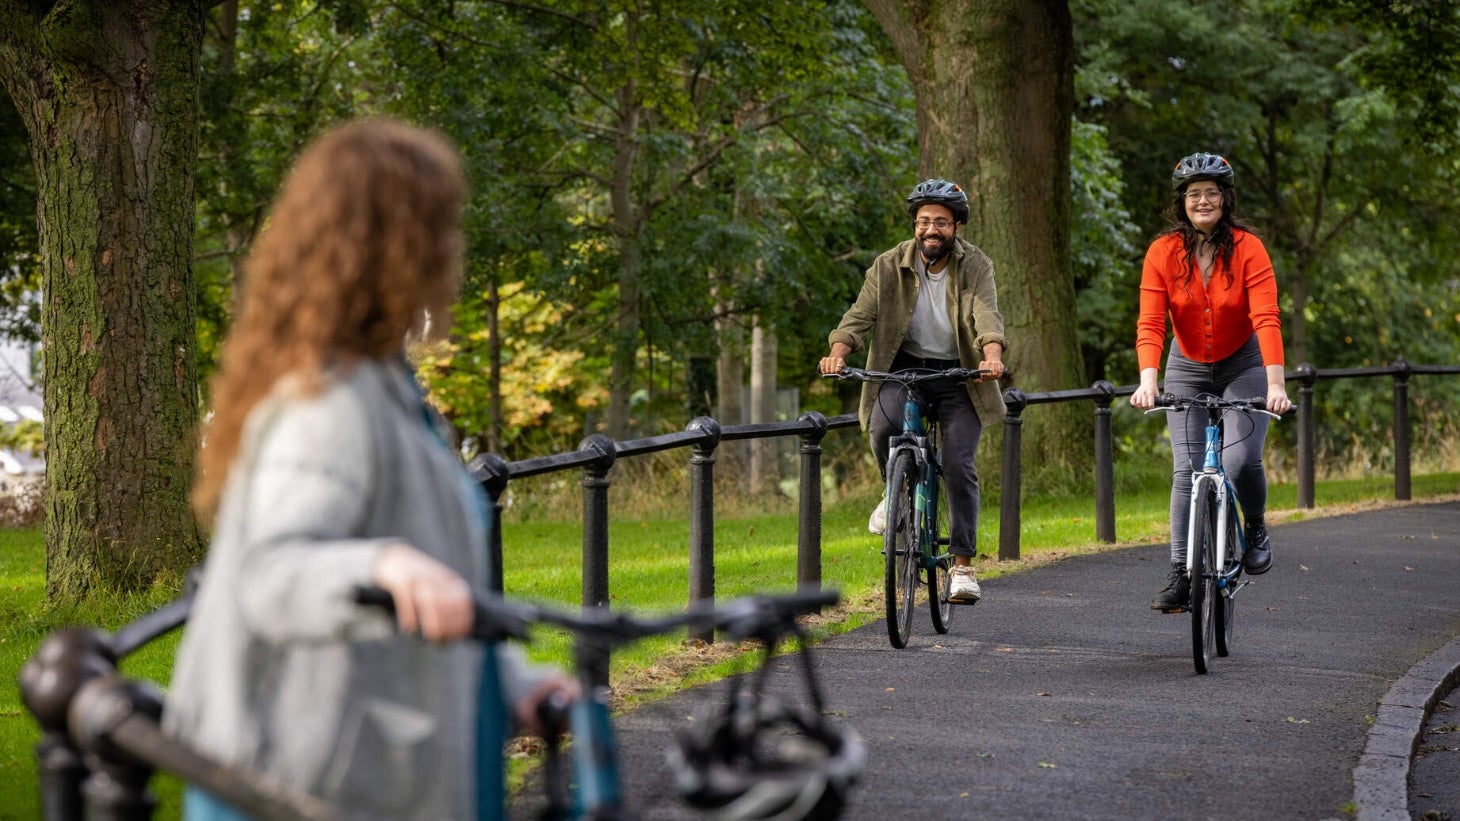 Image of cyclists in a park.